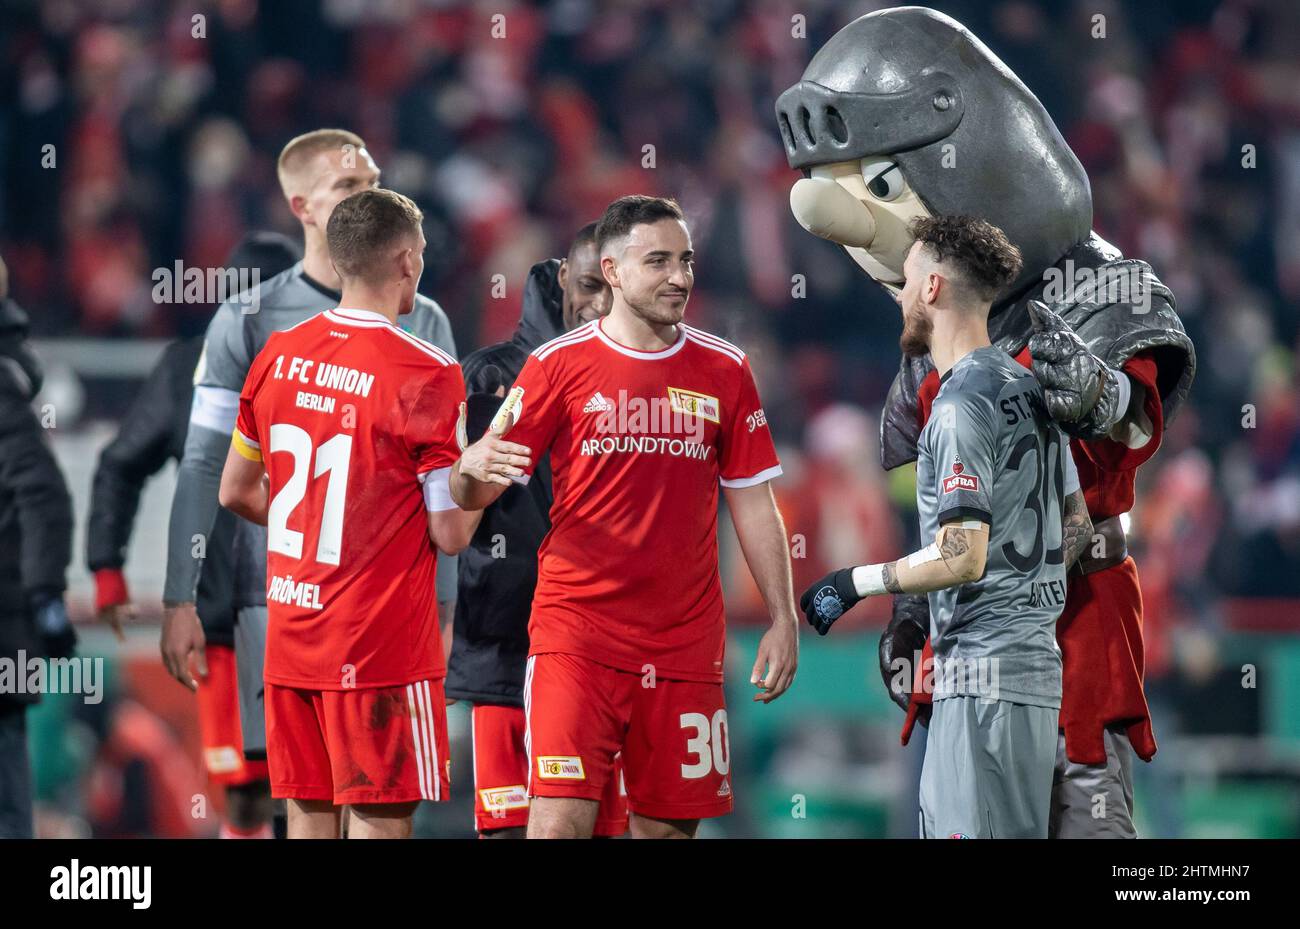 01 March 2022, Berlin: Soccer: DFB Cup, 1. FC Union Berlin - FC St. Pauli, quarterfinal, An der Alten Försterei. Marcel Hartel (2nd from right) of FC St. Pauli congratulates Berlin's Grischa Prömel (l), Kevin Möhwald (2nd from left) and mascot Ritter Keule on reaching the semifinals. Photo: Andreas Gora/dpa - IMPORTANT NOTE: In accordance with the requirements of the DFL Deutsche Fußball Liga and the DFB Deutscher Fußball-Bund, it is prohibited to use or have used photographs taken in the stadium and/or of the match in the form of sequence pictures and/or video-like photo series. Stock Photo